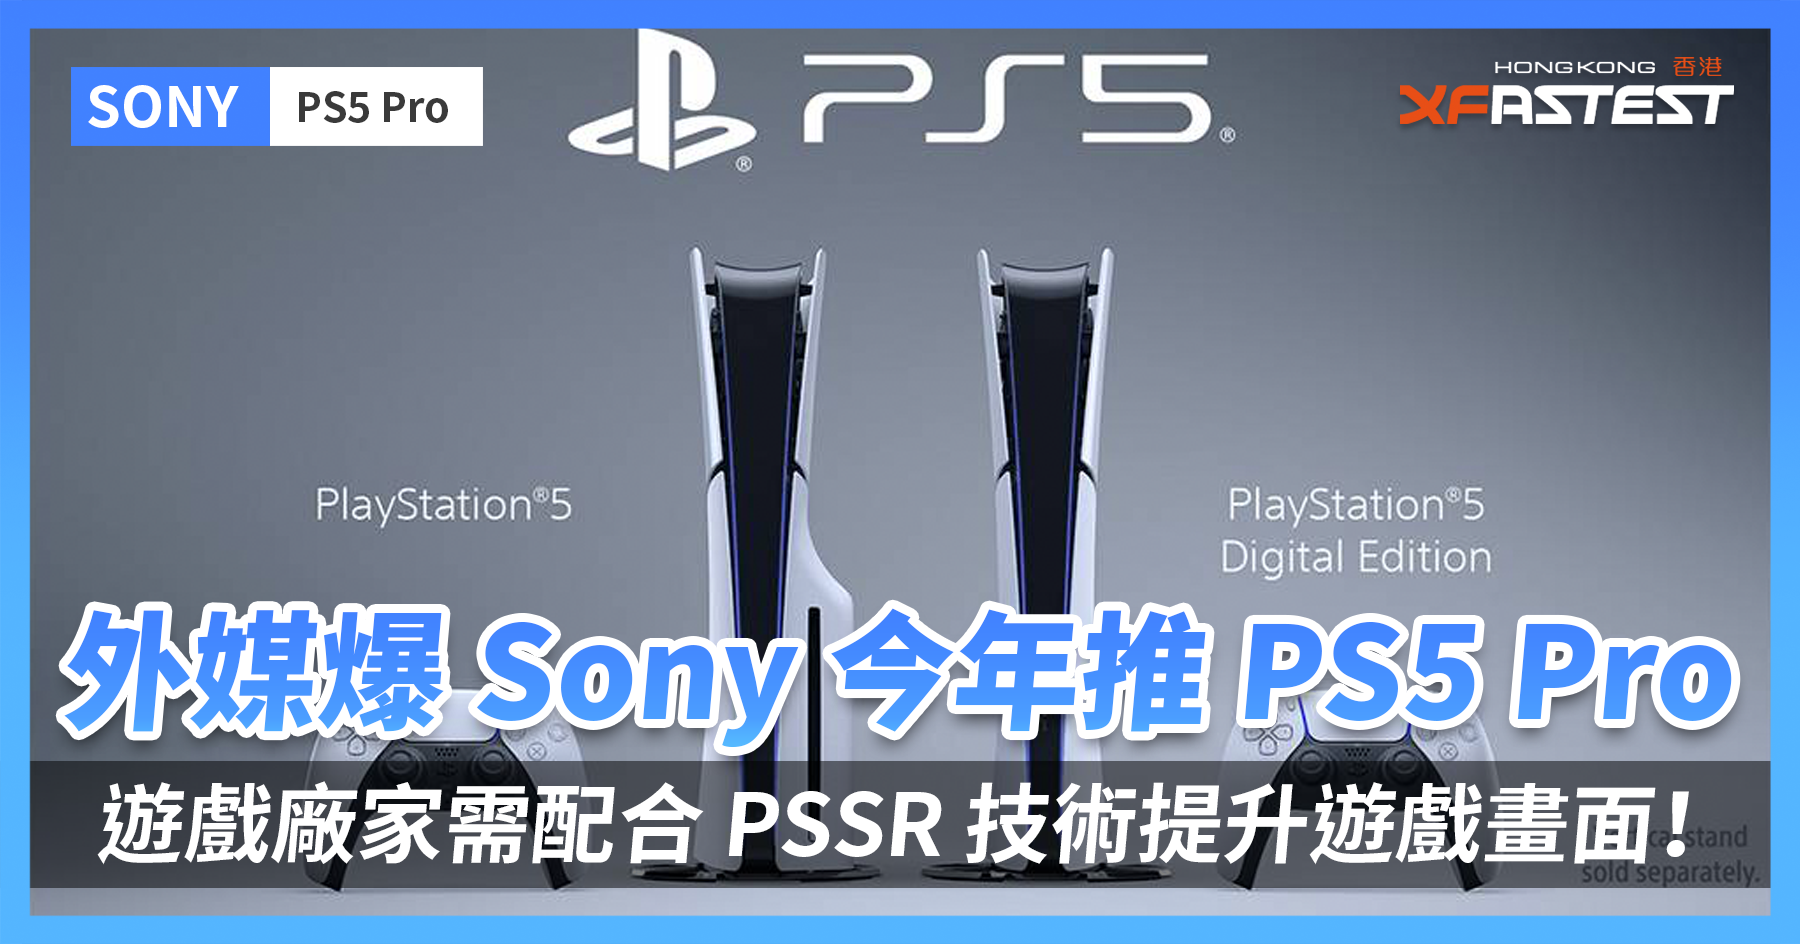 Foreign media broke the news that Sony will launch PS5 Pro this year, and game manufacturers need to cooperate with PSSR technology to improve game graphics!